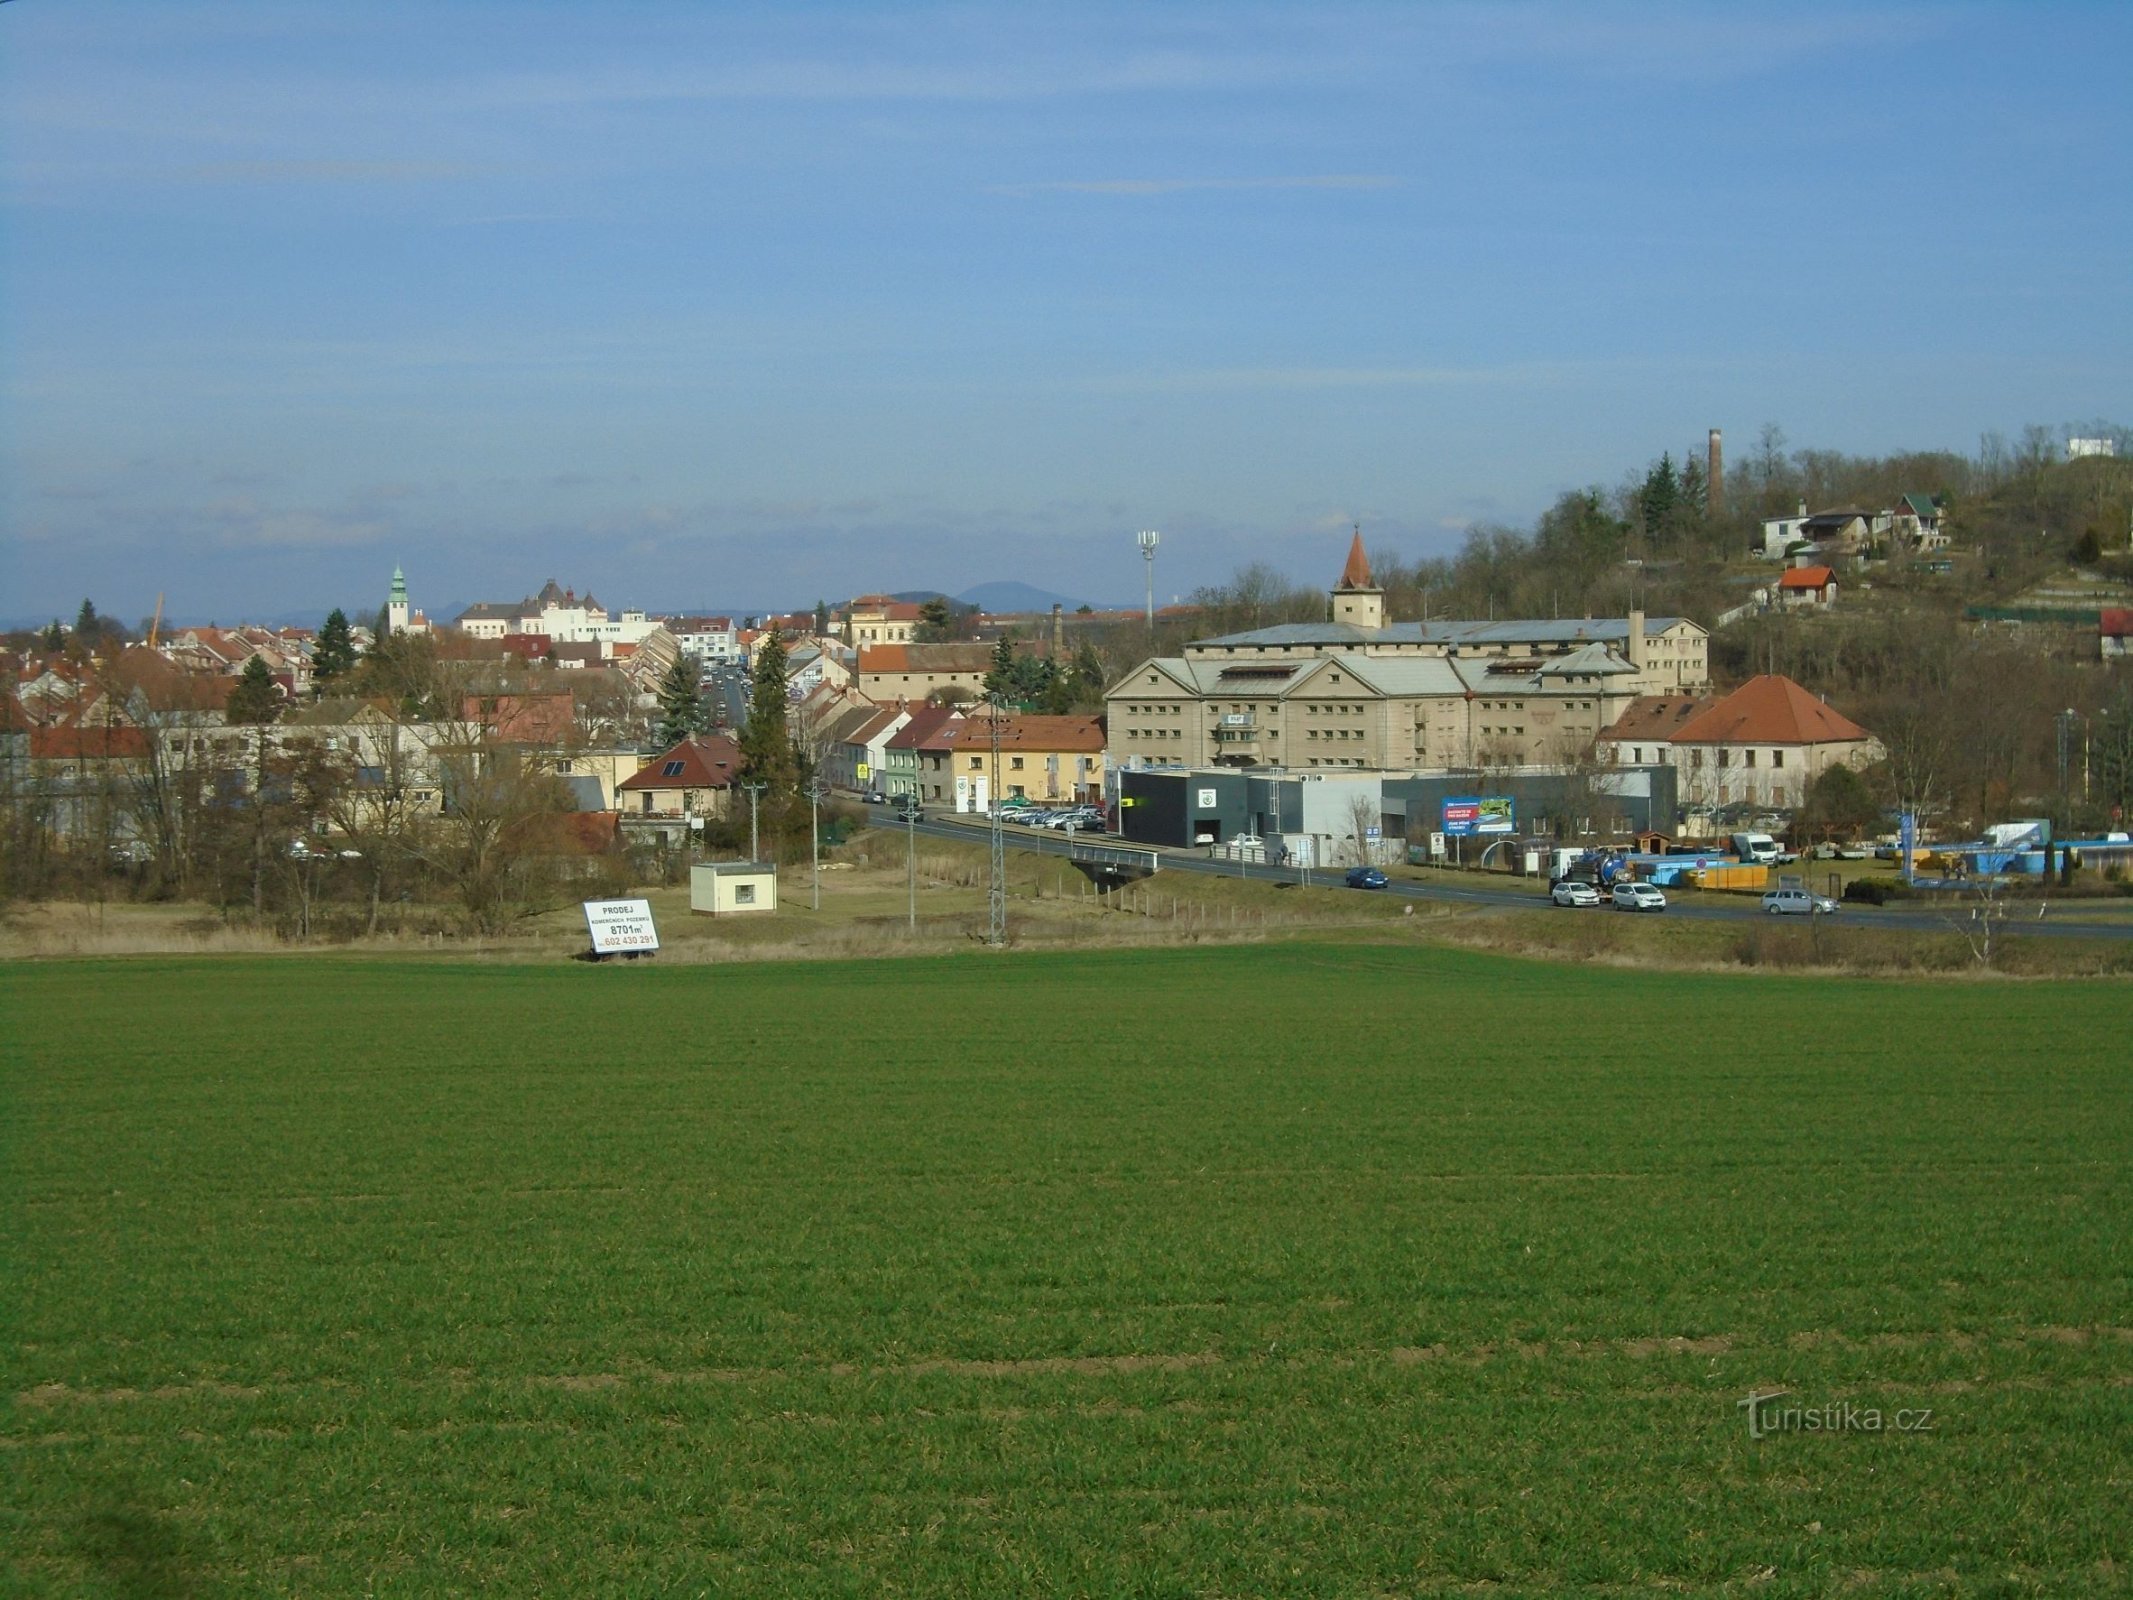 View of Roudnice nad Labem (March 6.3.2019, XNUMX)